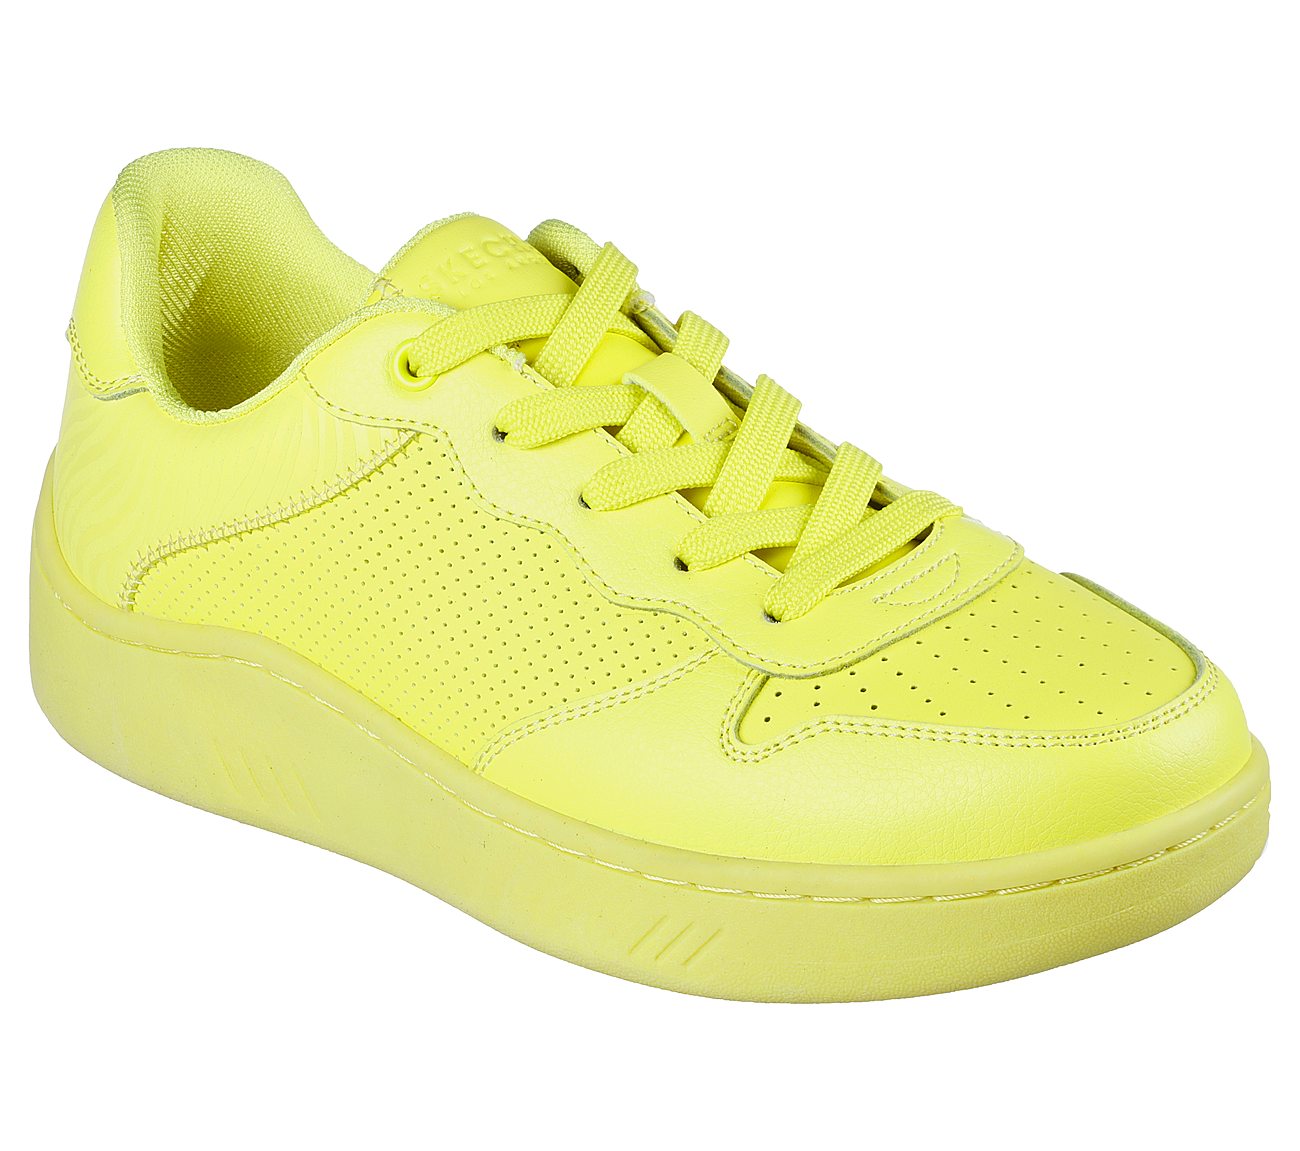 UPBEATS - BRIGHT COURT, NEON/YELLOW Footwear Right View